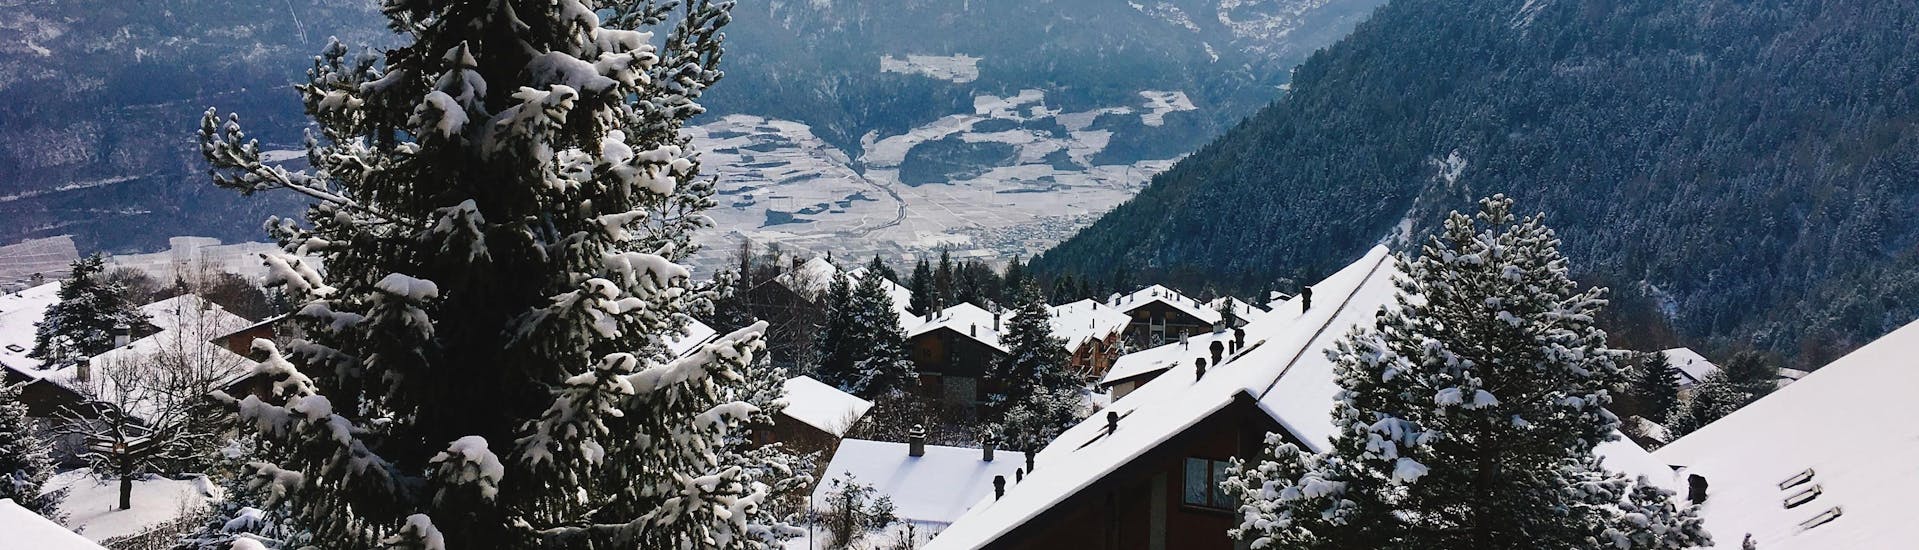 A view over the snow-covered rooftops of the Swiss village of Ovronnaz, a popular ski resort in where visitors can book ski lessons with one of the local ski schools.